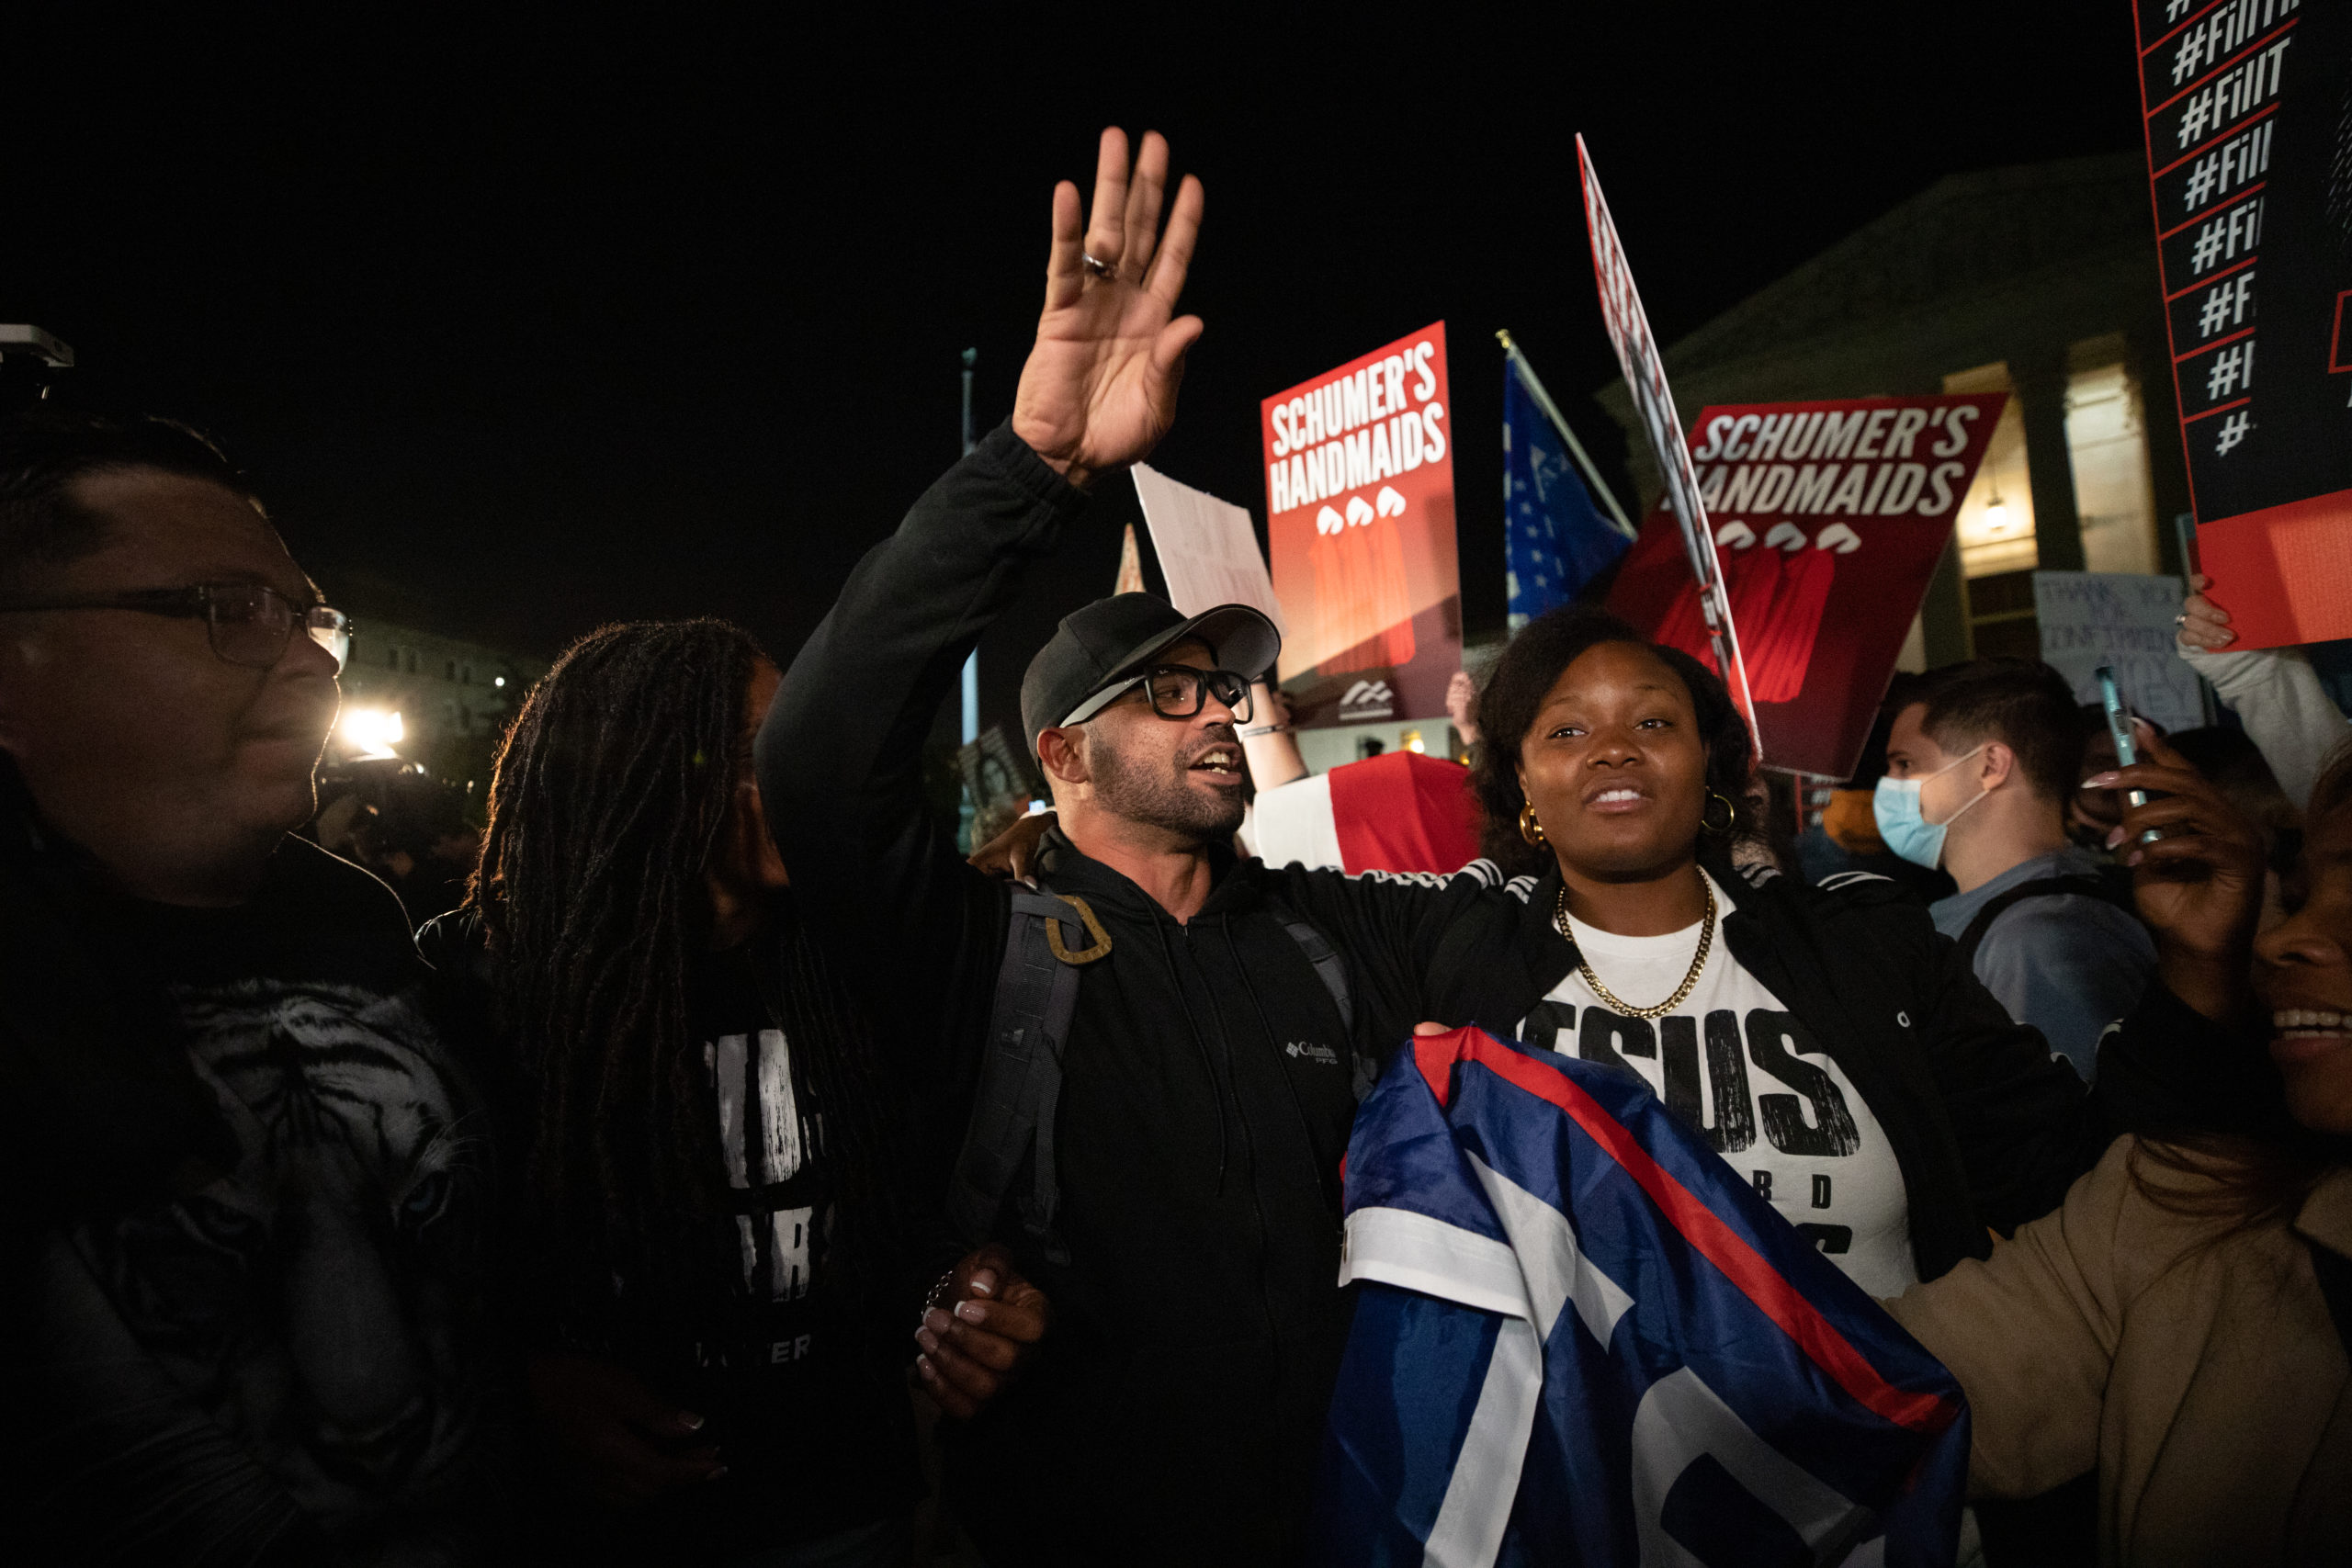 Proud Boys Chairman Enrique Tarrio attended demonstrations outside the Supreme Court after the Senate voted to confirm Amy Coney Barrett in Washington, D.C. on October 26, 2020. (Kaylee Greenlee - Daily Caller News Foundation)